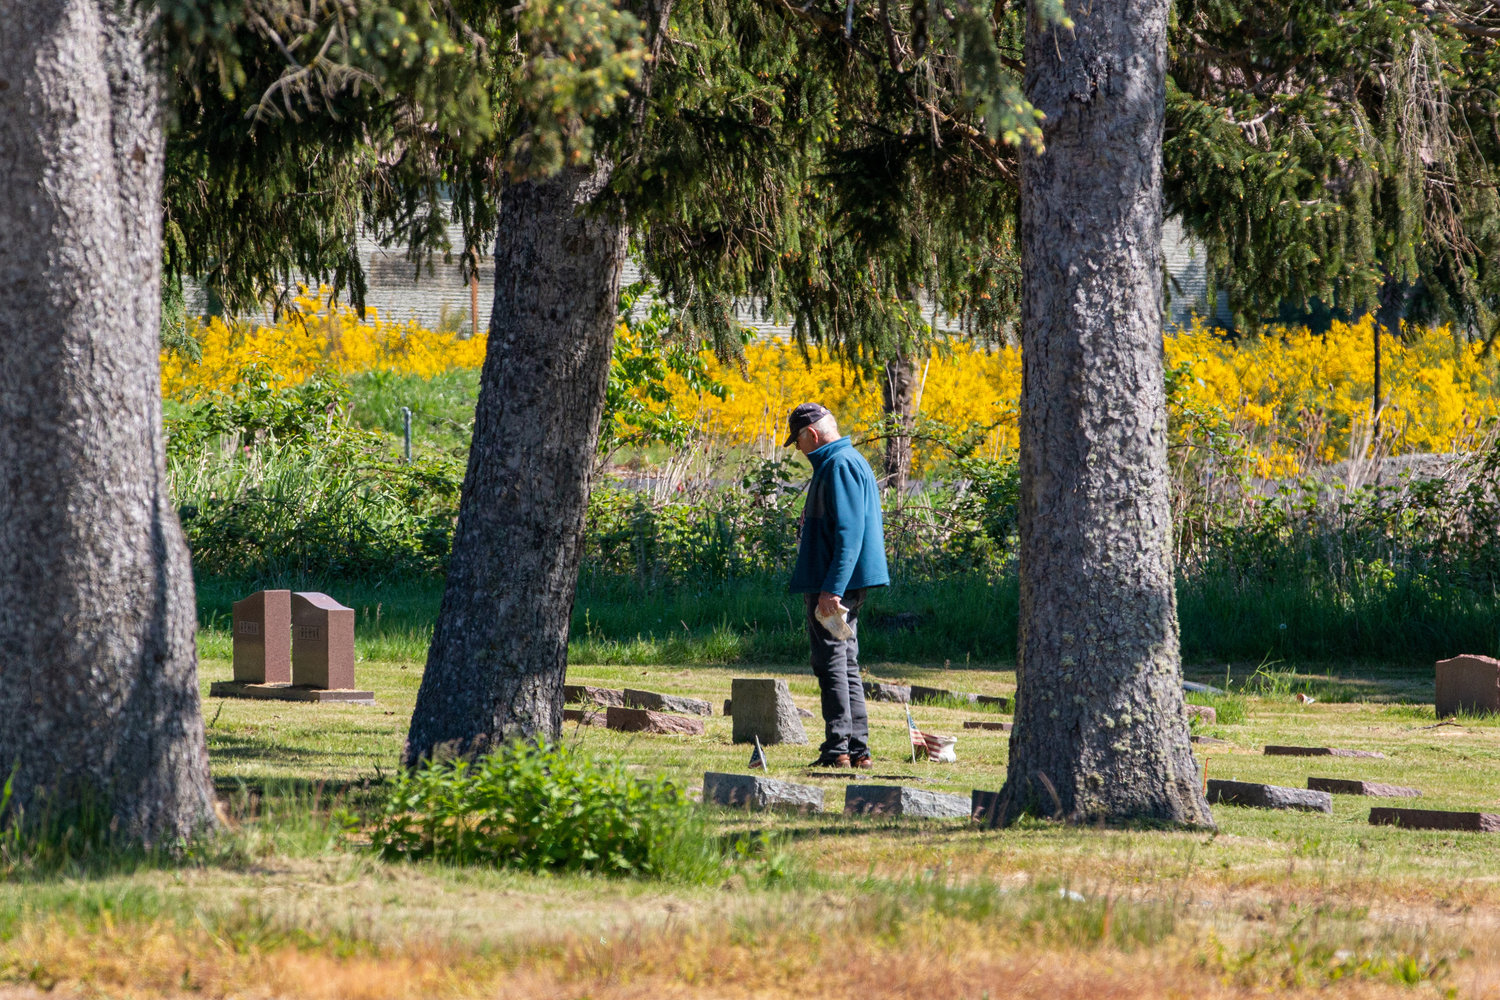 A man stands in front of a grave at the Greenwood Memorial Park in Centralia.